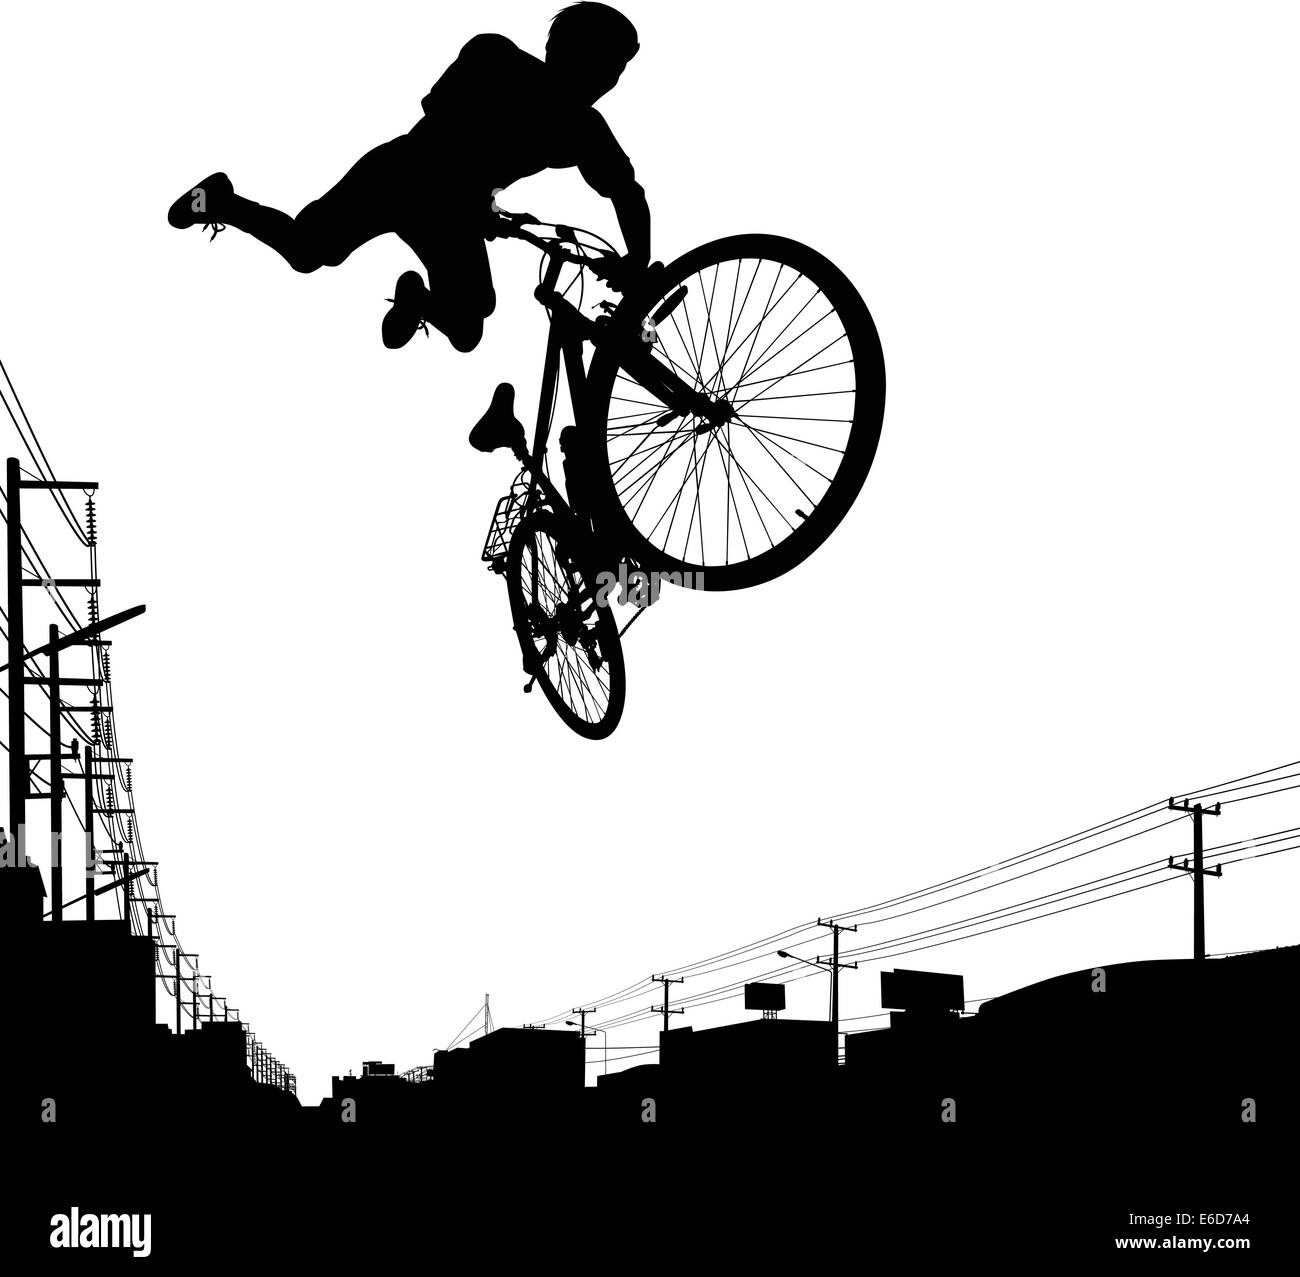 Vector illustration of a boy jumping with his bike Stock Vector